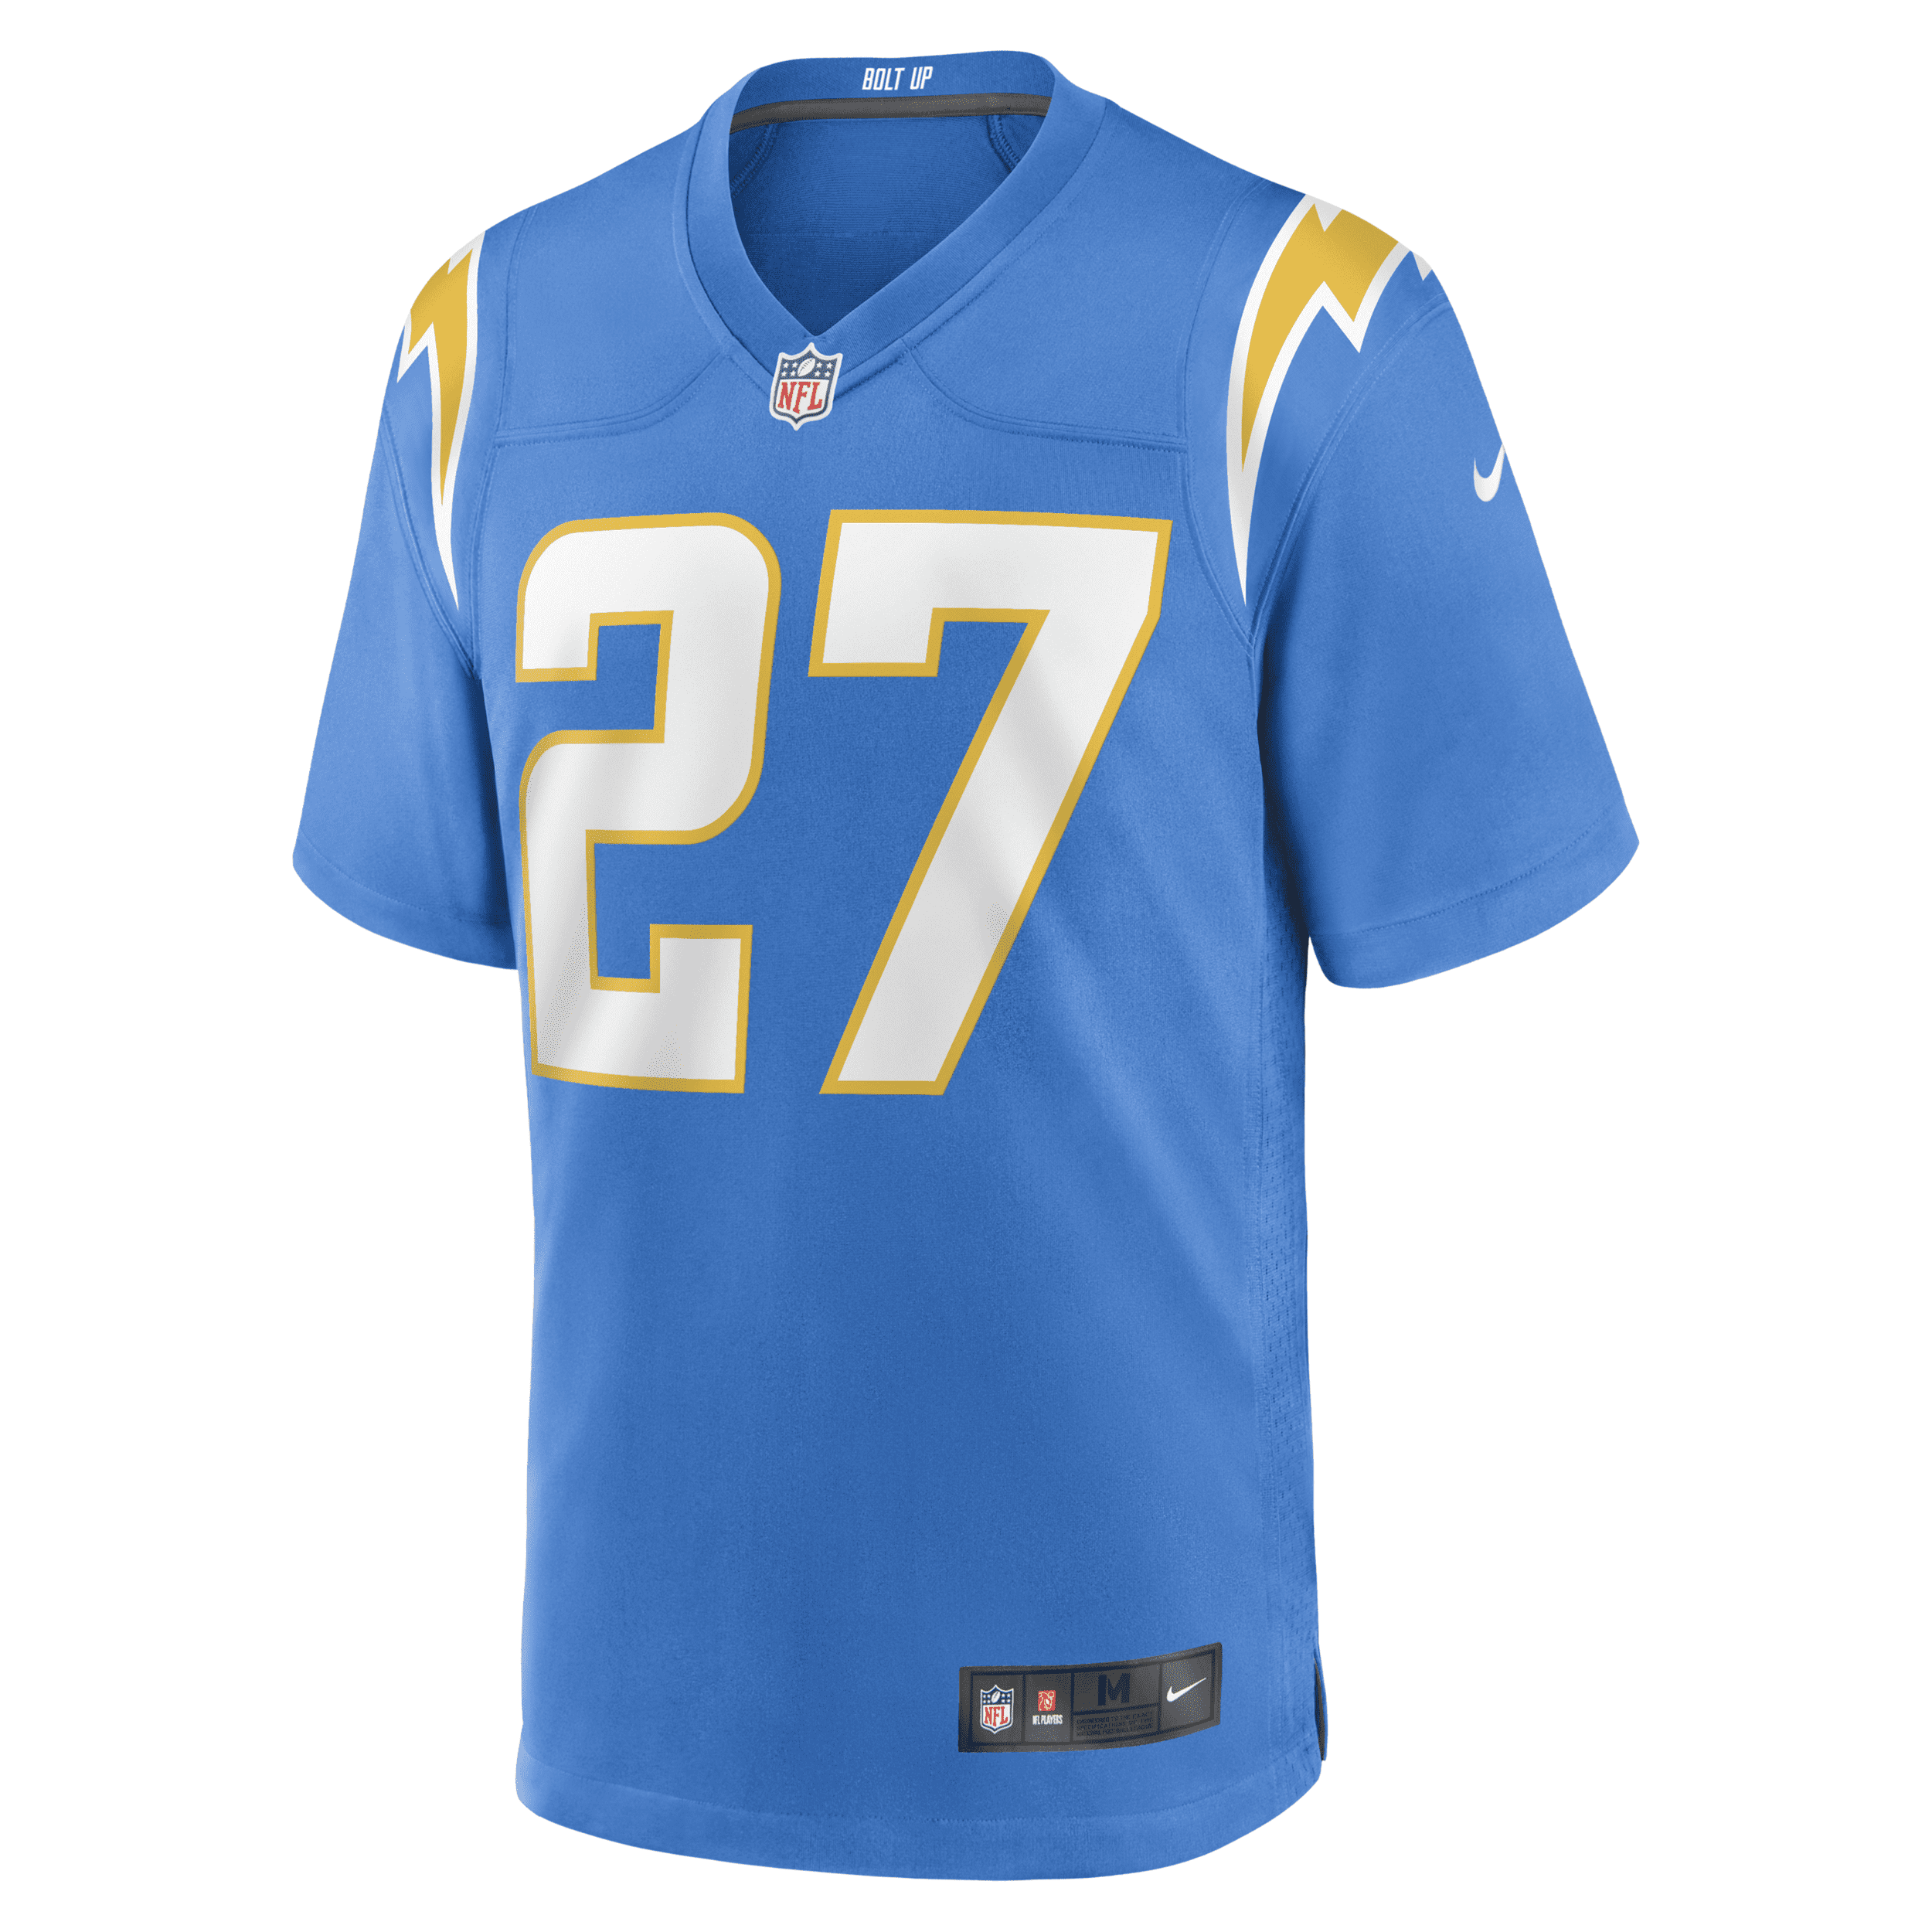 NIKE MEN'S NFL LOS ANGELES CHARGERS (J.C. JACKSON) GAME FOOTBALL JERSEY,1009227616